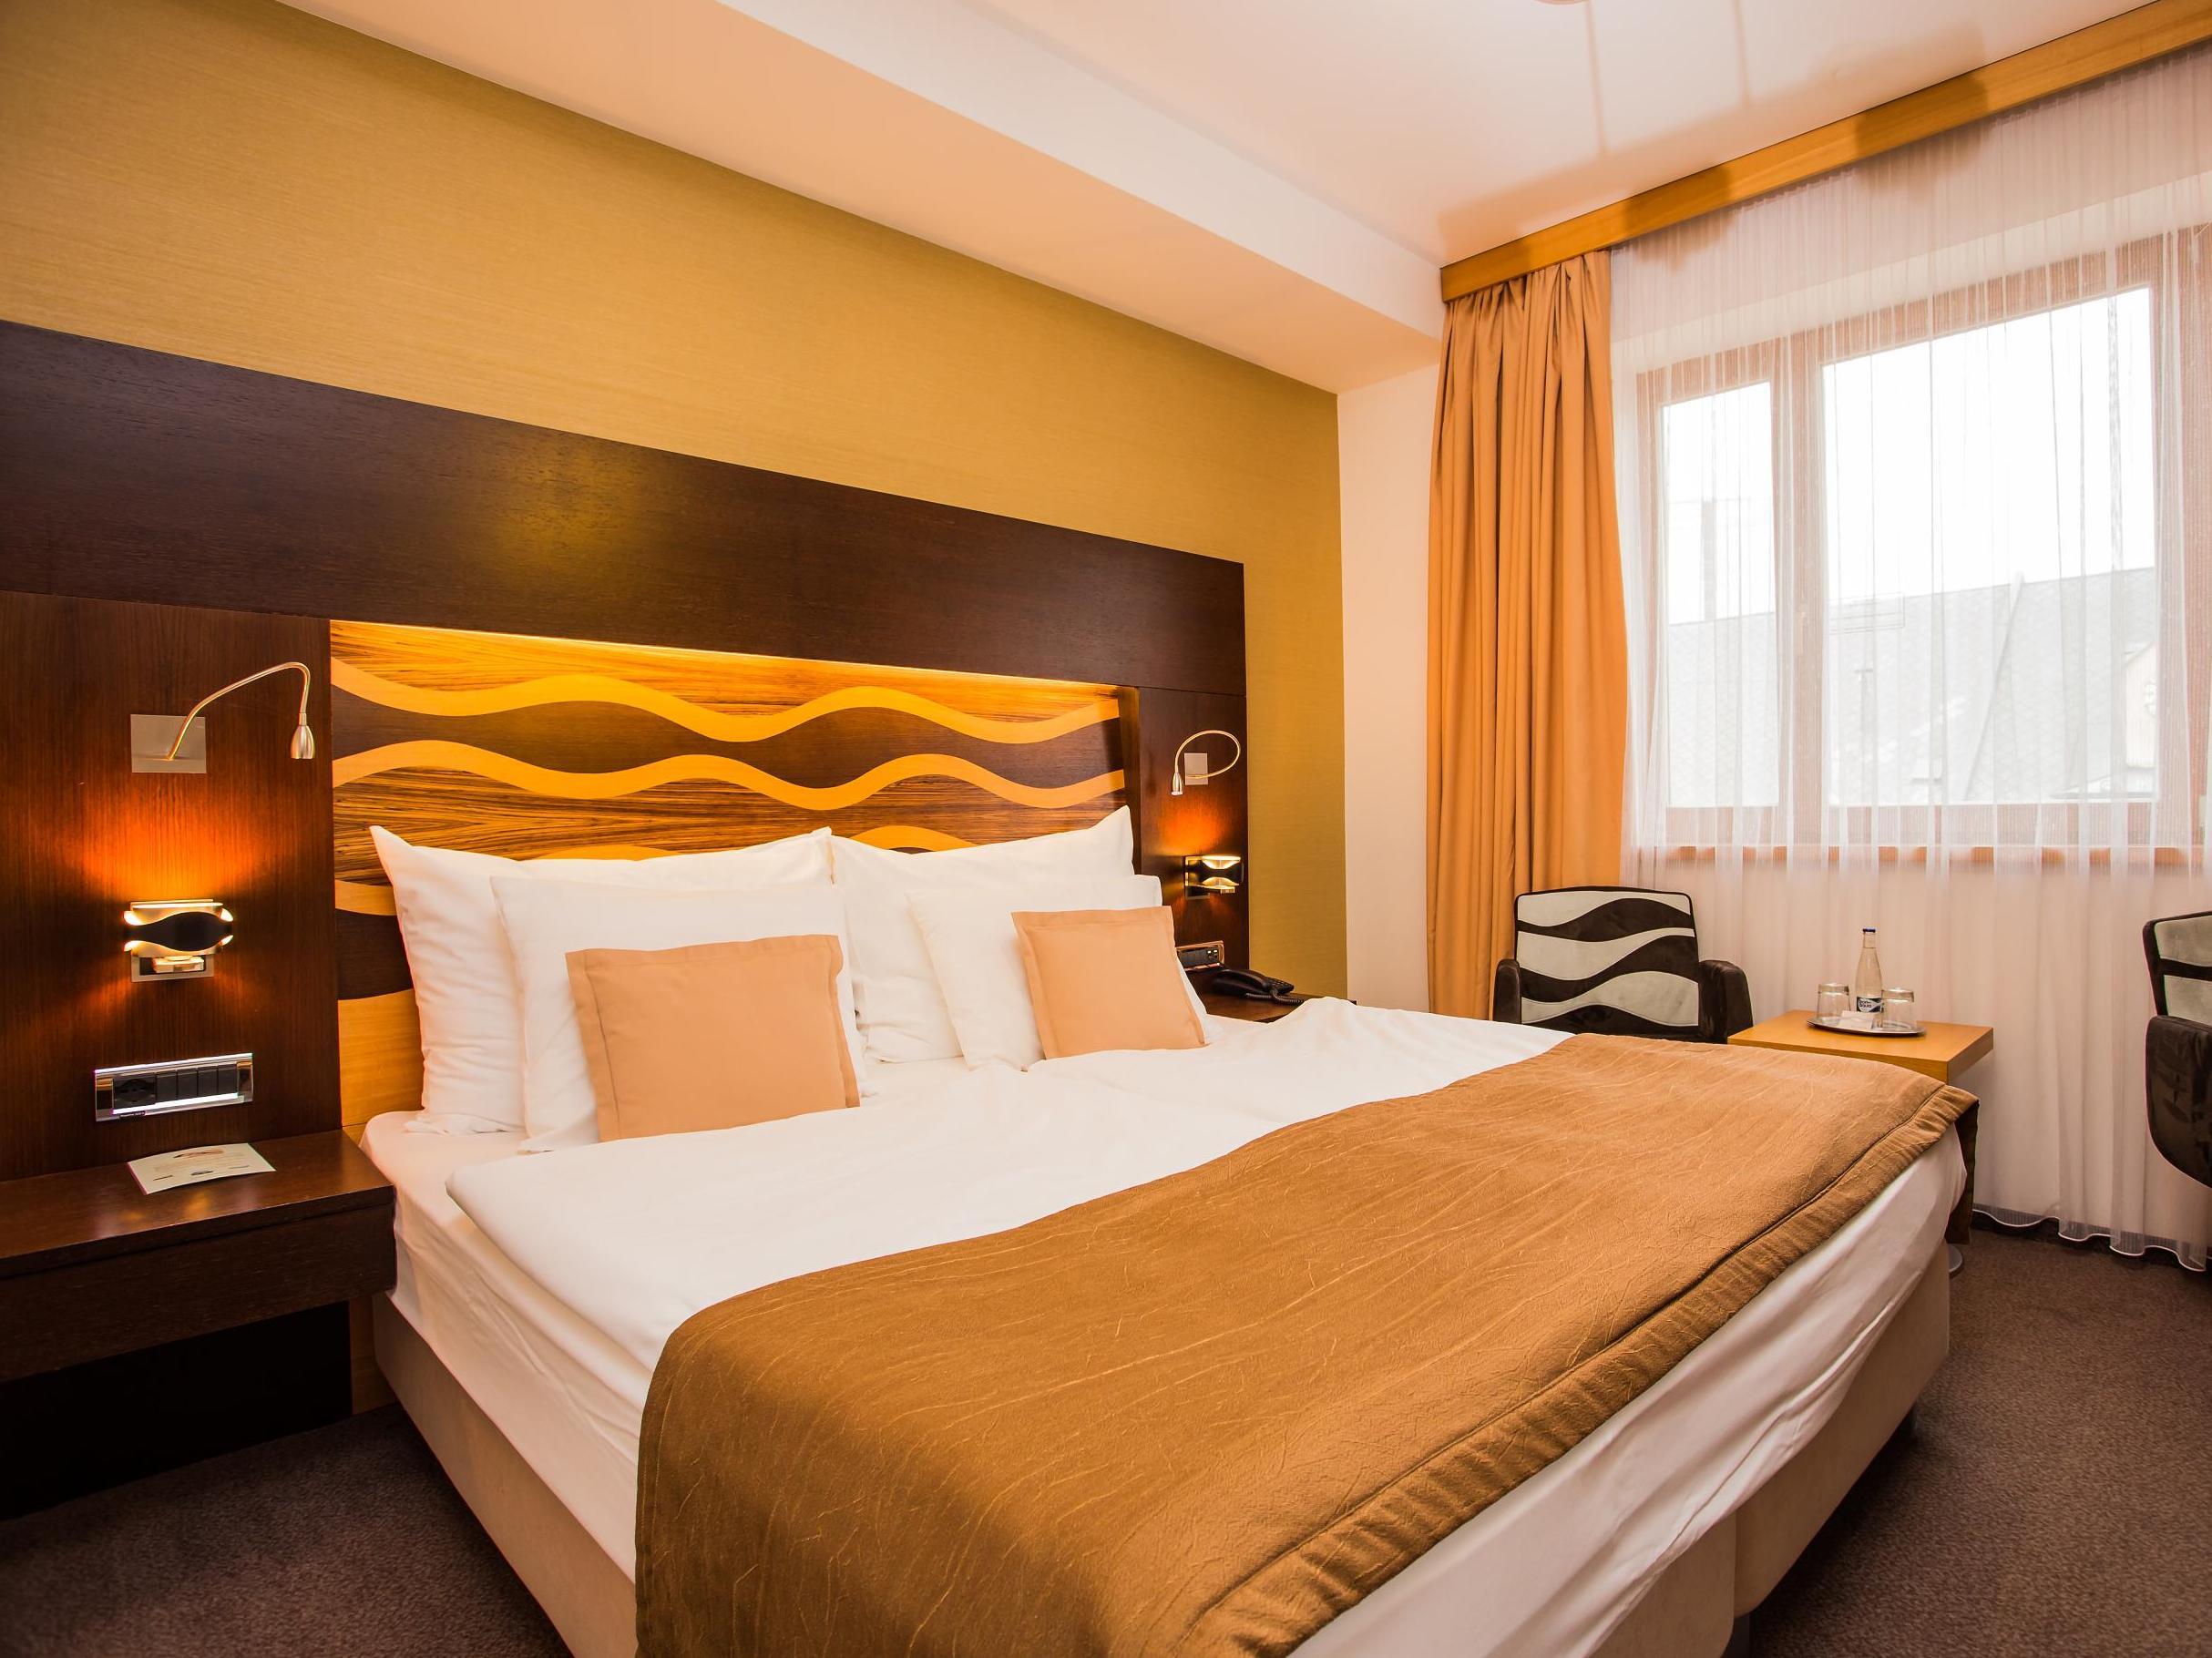 Danubia Gate Hotel Slovakia FAQ 2016, What facilities are there in Danubia Gate Hotel Slovakia 2016, What Languages Spoken are Supported in Danubia Gate Hotel Slovakia 2016, Which payment cards are accepted in Danubia Gate Hotel Slovakia , Slovakia Danubia Gate Hotel room facilities and services Q&A 2016, Slovakia Danubia Gate Hotel online booking services 2016, Slovakia Danubia Gate Hotel address 2016, Slovakia Danubia Gate Hotel telephone number 2016,Slovakia Danubia Gate Hotel map 2016, Slovakia Danubia Gate Hotel traffic guide 2016, how to go Slovakia Danubia Gate Hotel, Slovakia Danubia Gate Hotel booking online 2016, Slovakia Danubia Gate Hotel room types 2016.